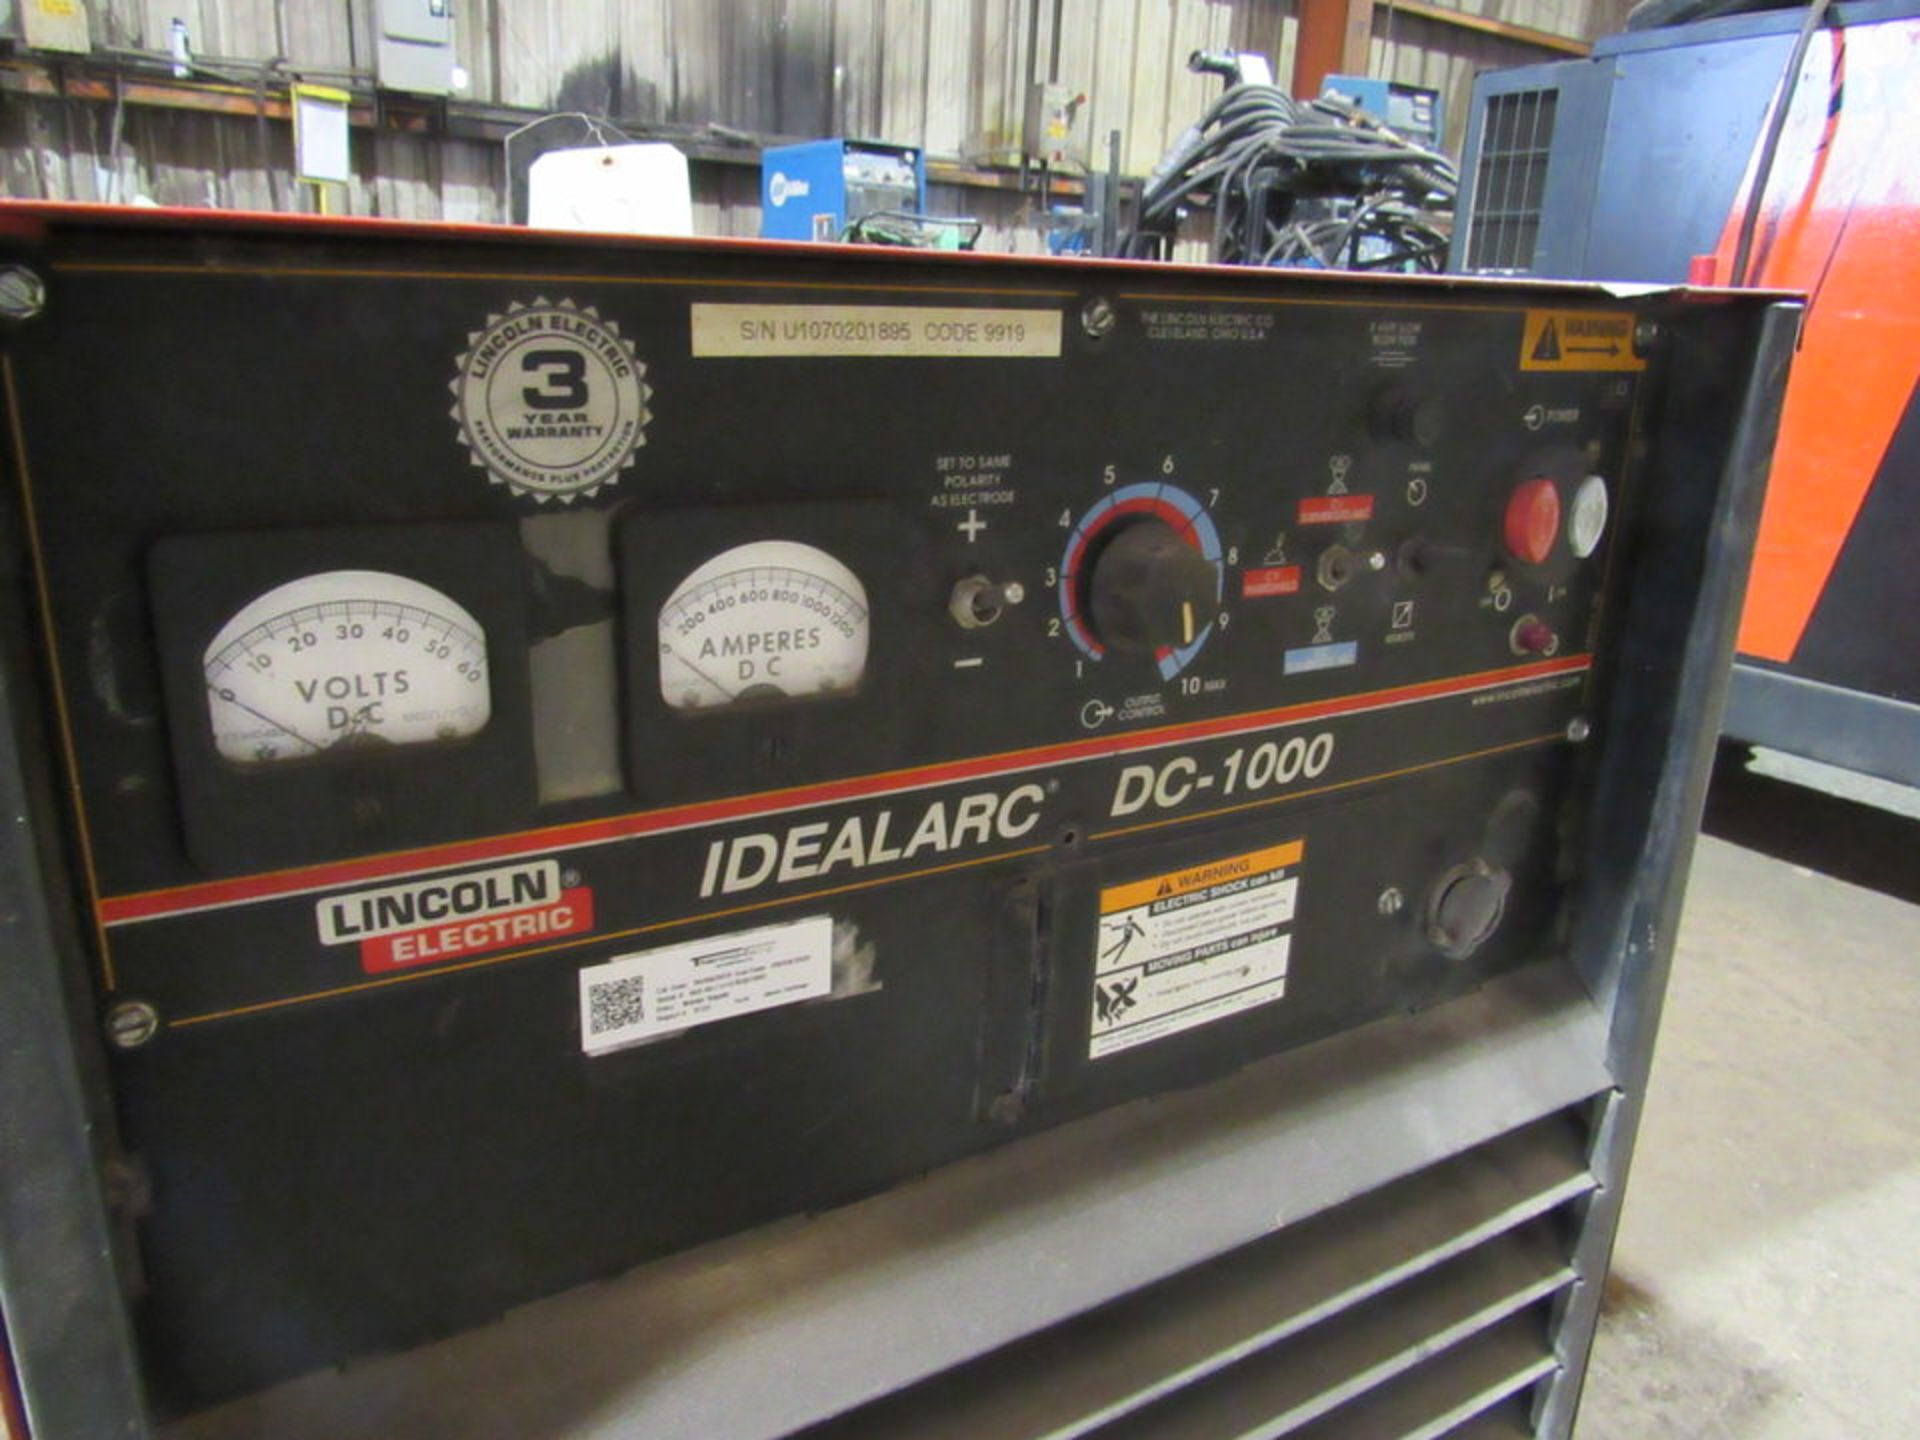 Lincoln Idealarc DC-1000 Welding Power Source - Image 5 of 6